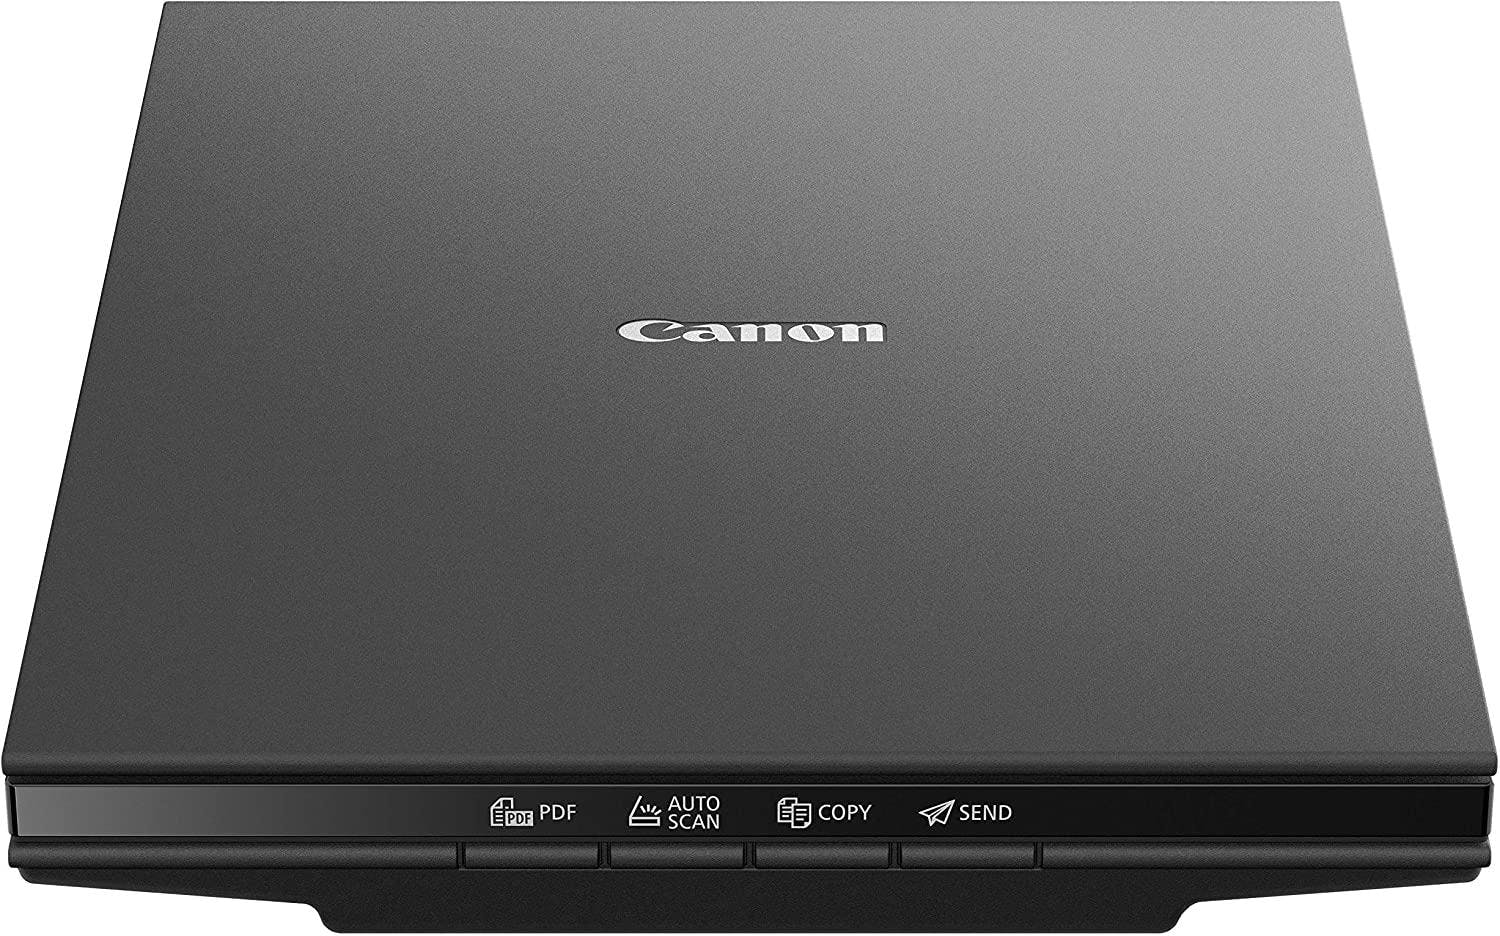 Canon MX922 All-In-One Printer/Scanner